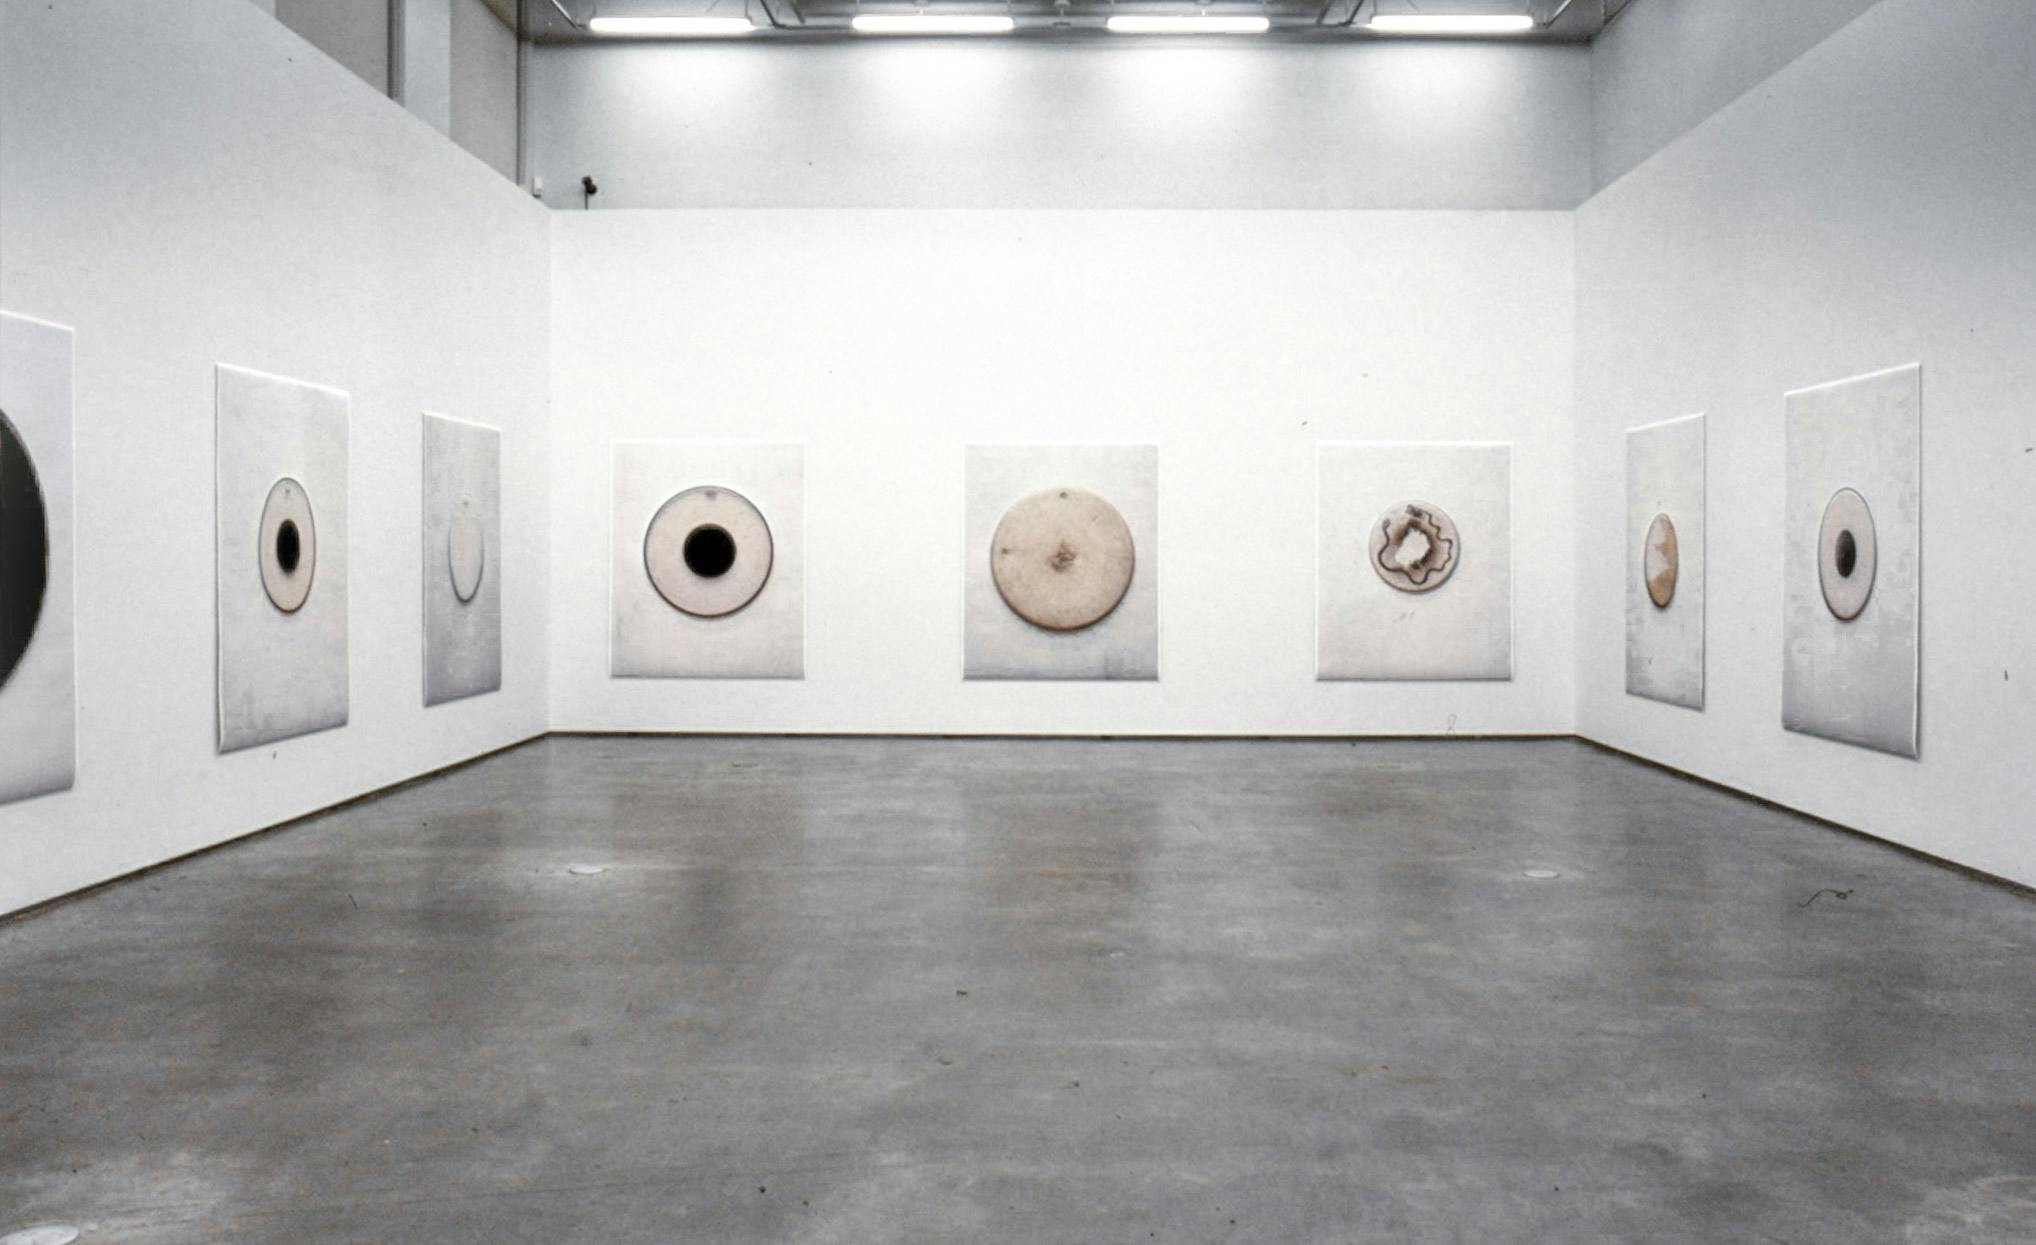 Eight large-sized coloured photographs are installed on the gallery walls. They are all same-sized, and each of them depicts a different circular-shaped flat object in the middle.